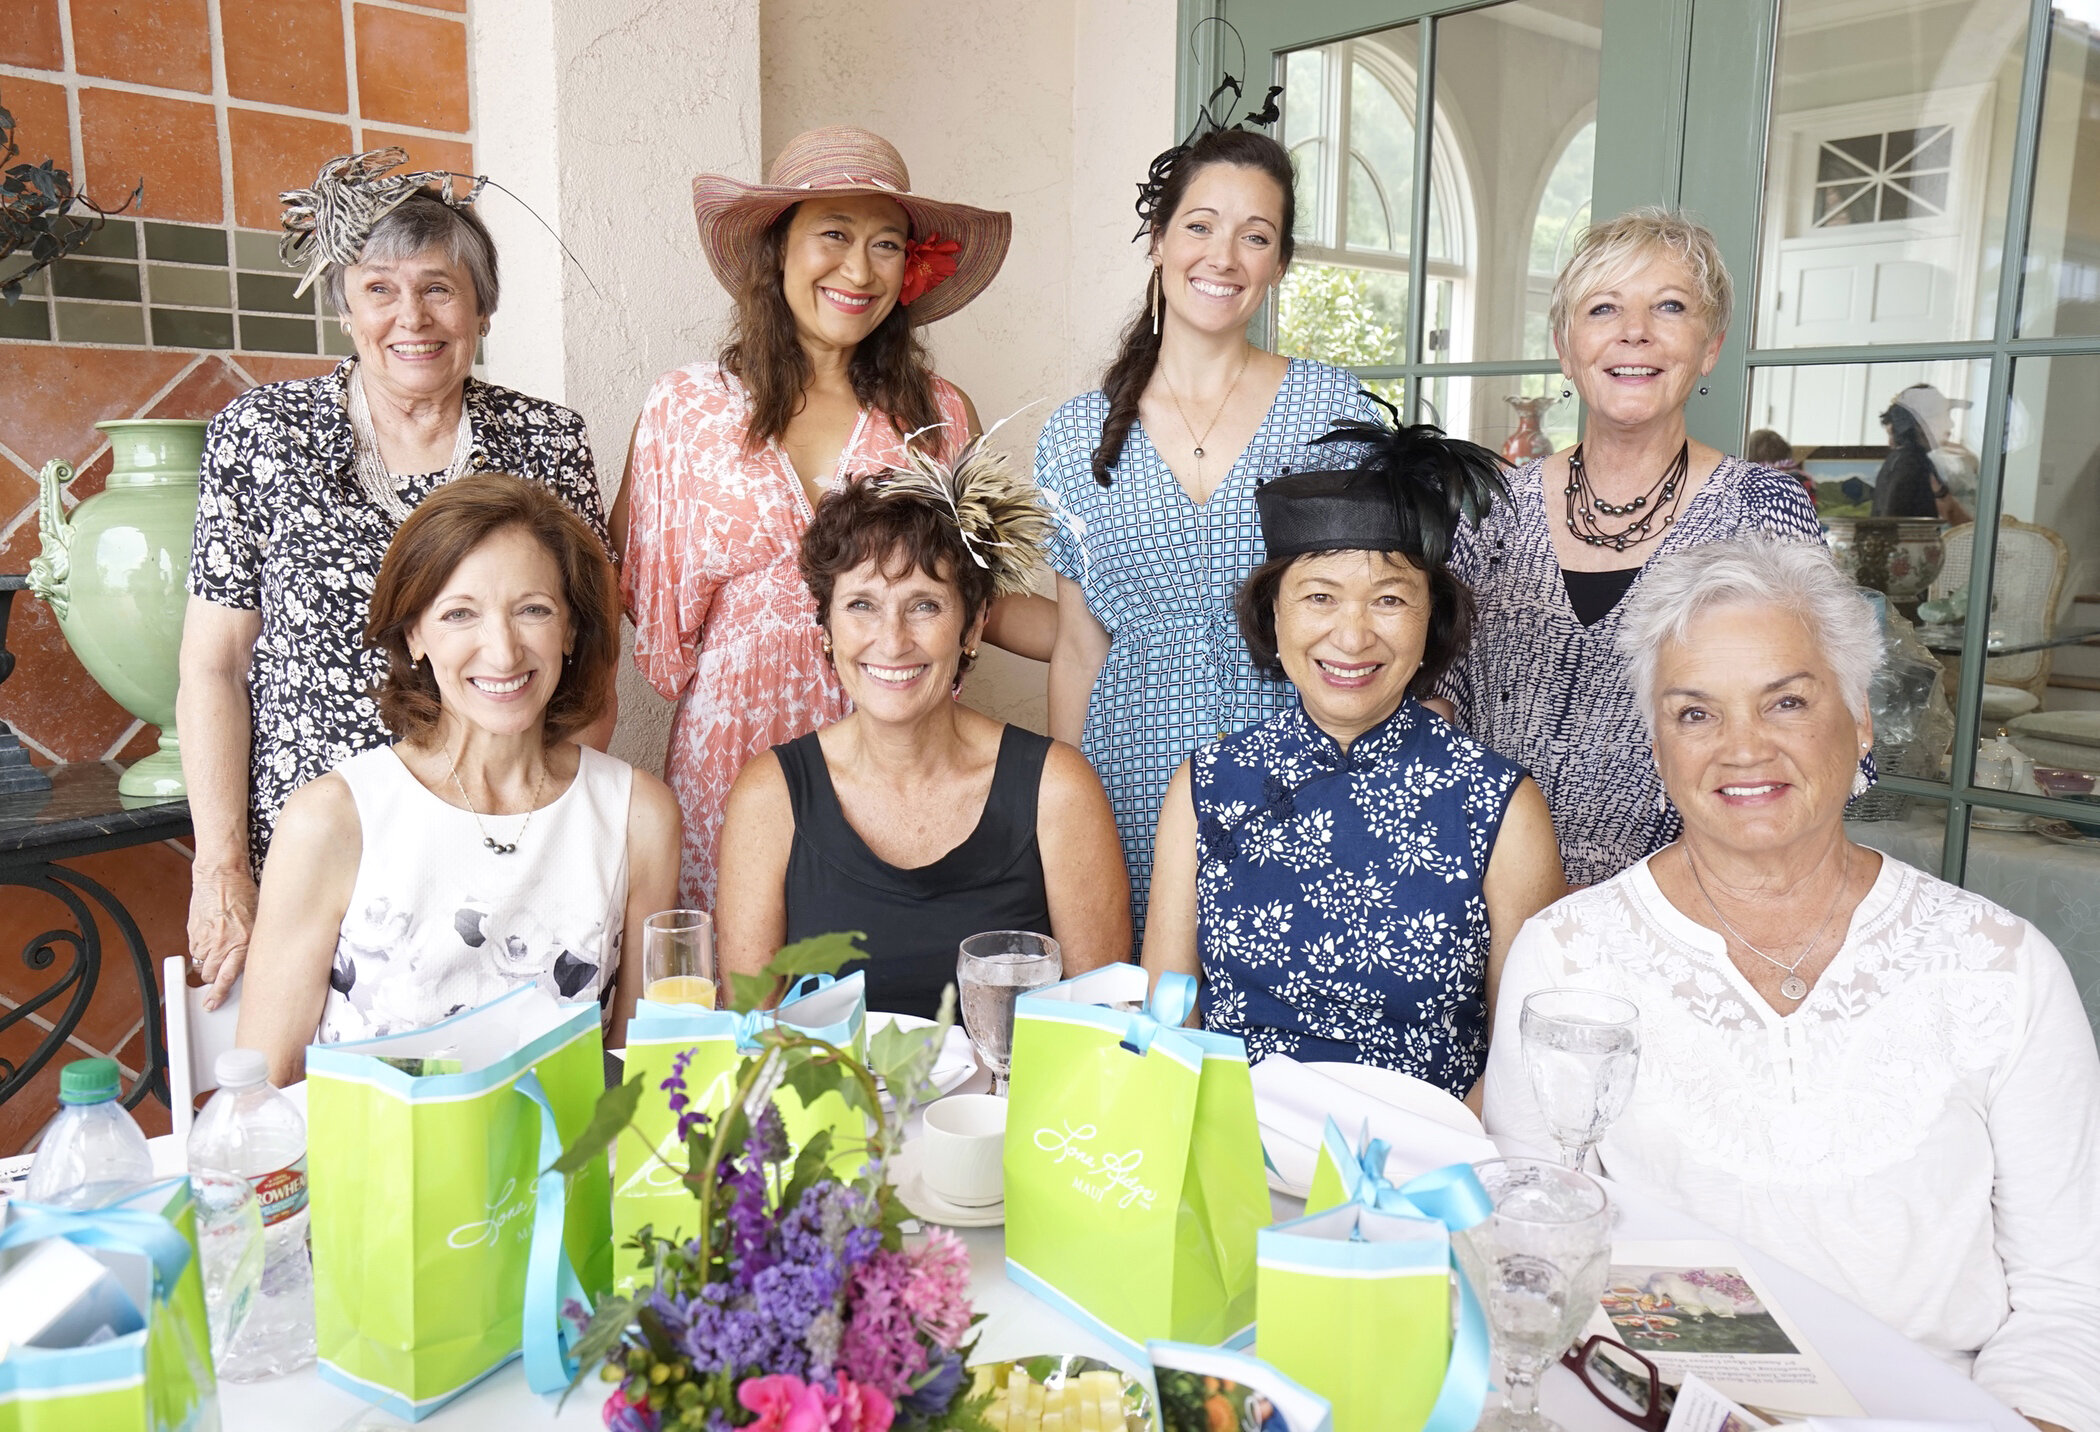  High tea guests (pictured from left): (top row) Suzanne George, Mei Li Coon, Jenny Coon, Paula Heiskell; (bottom row) Cindy Sawyer, Nutie Keogh, Lynn Coon, Sonia Phillips. 